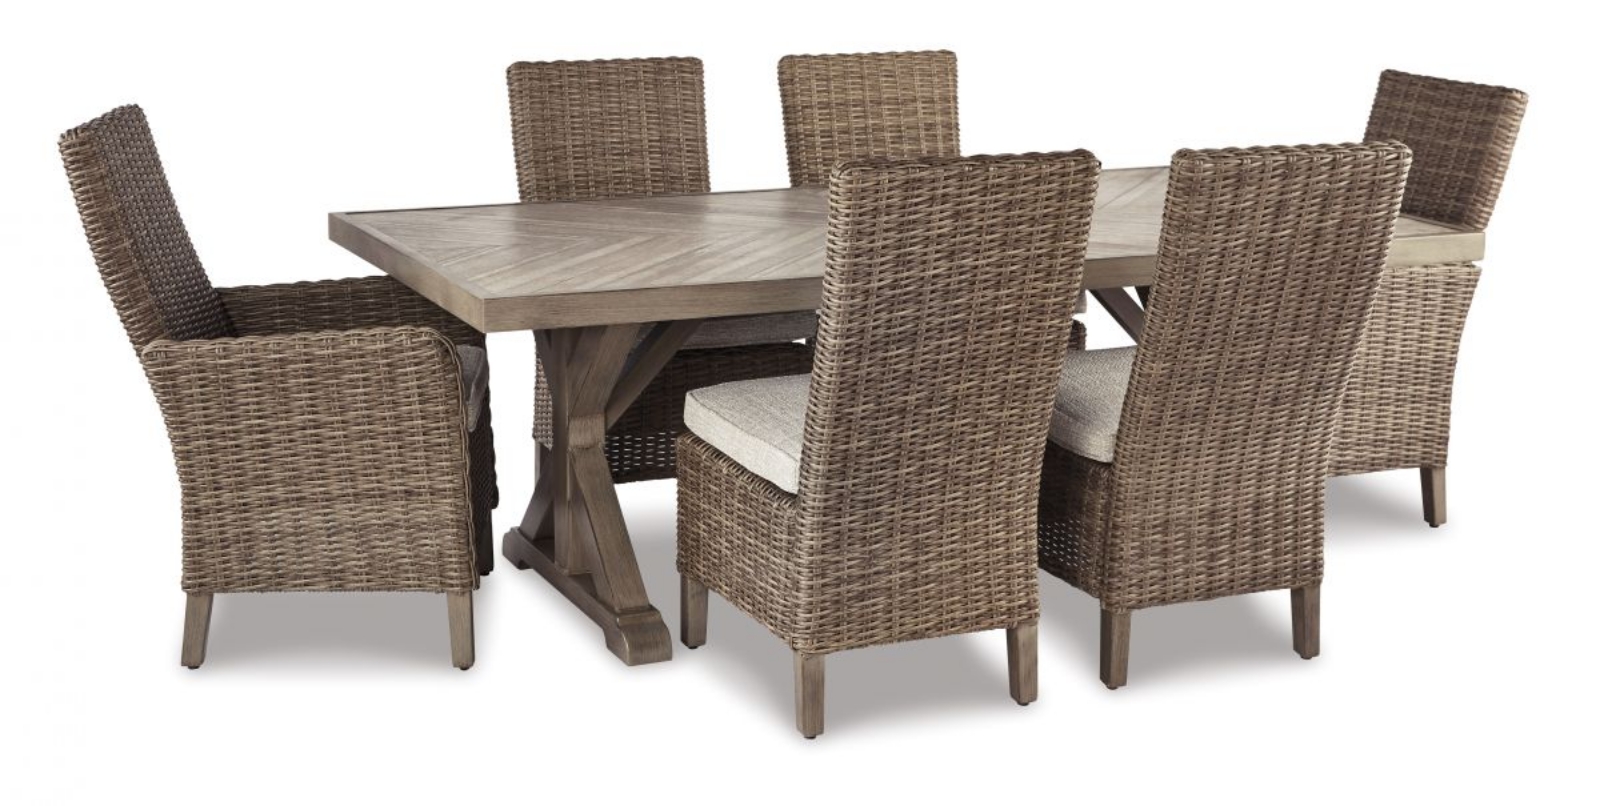 Picture of Beachcroft Outdoor Dining Table & 6 Chairs